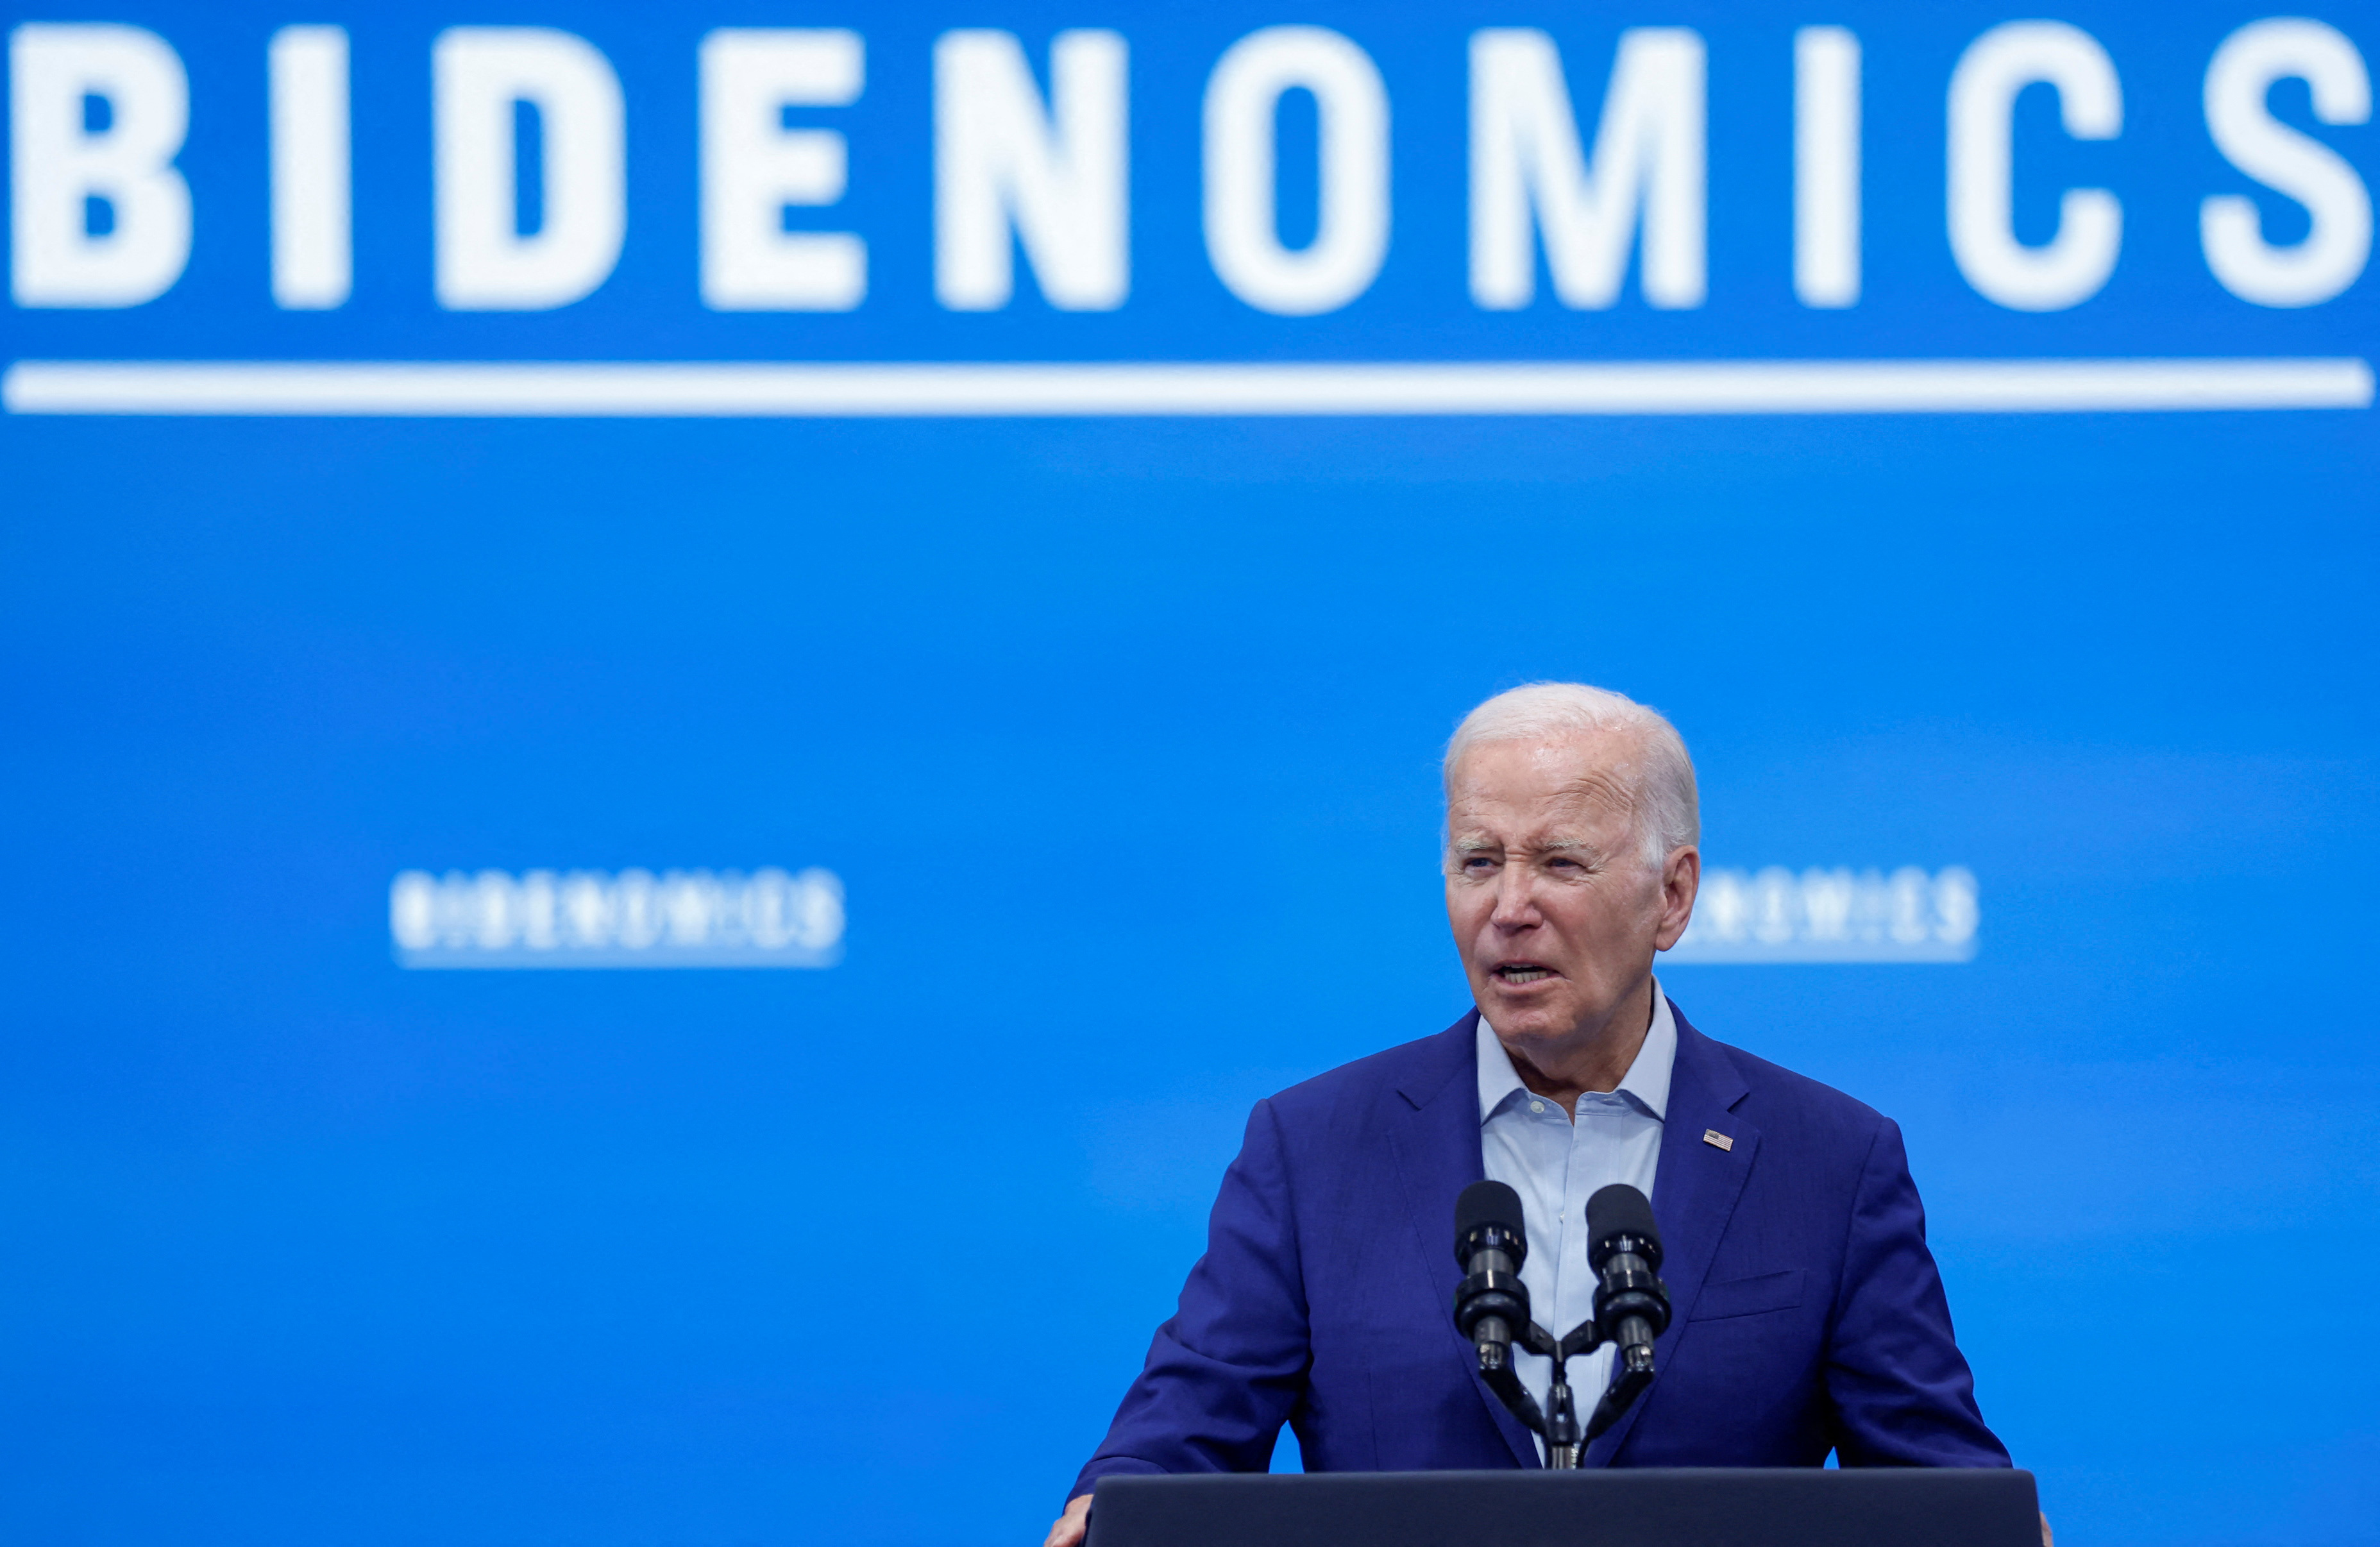 U.S. President Biden delivers remarks on the economy in Belen, New Mexico